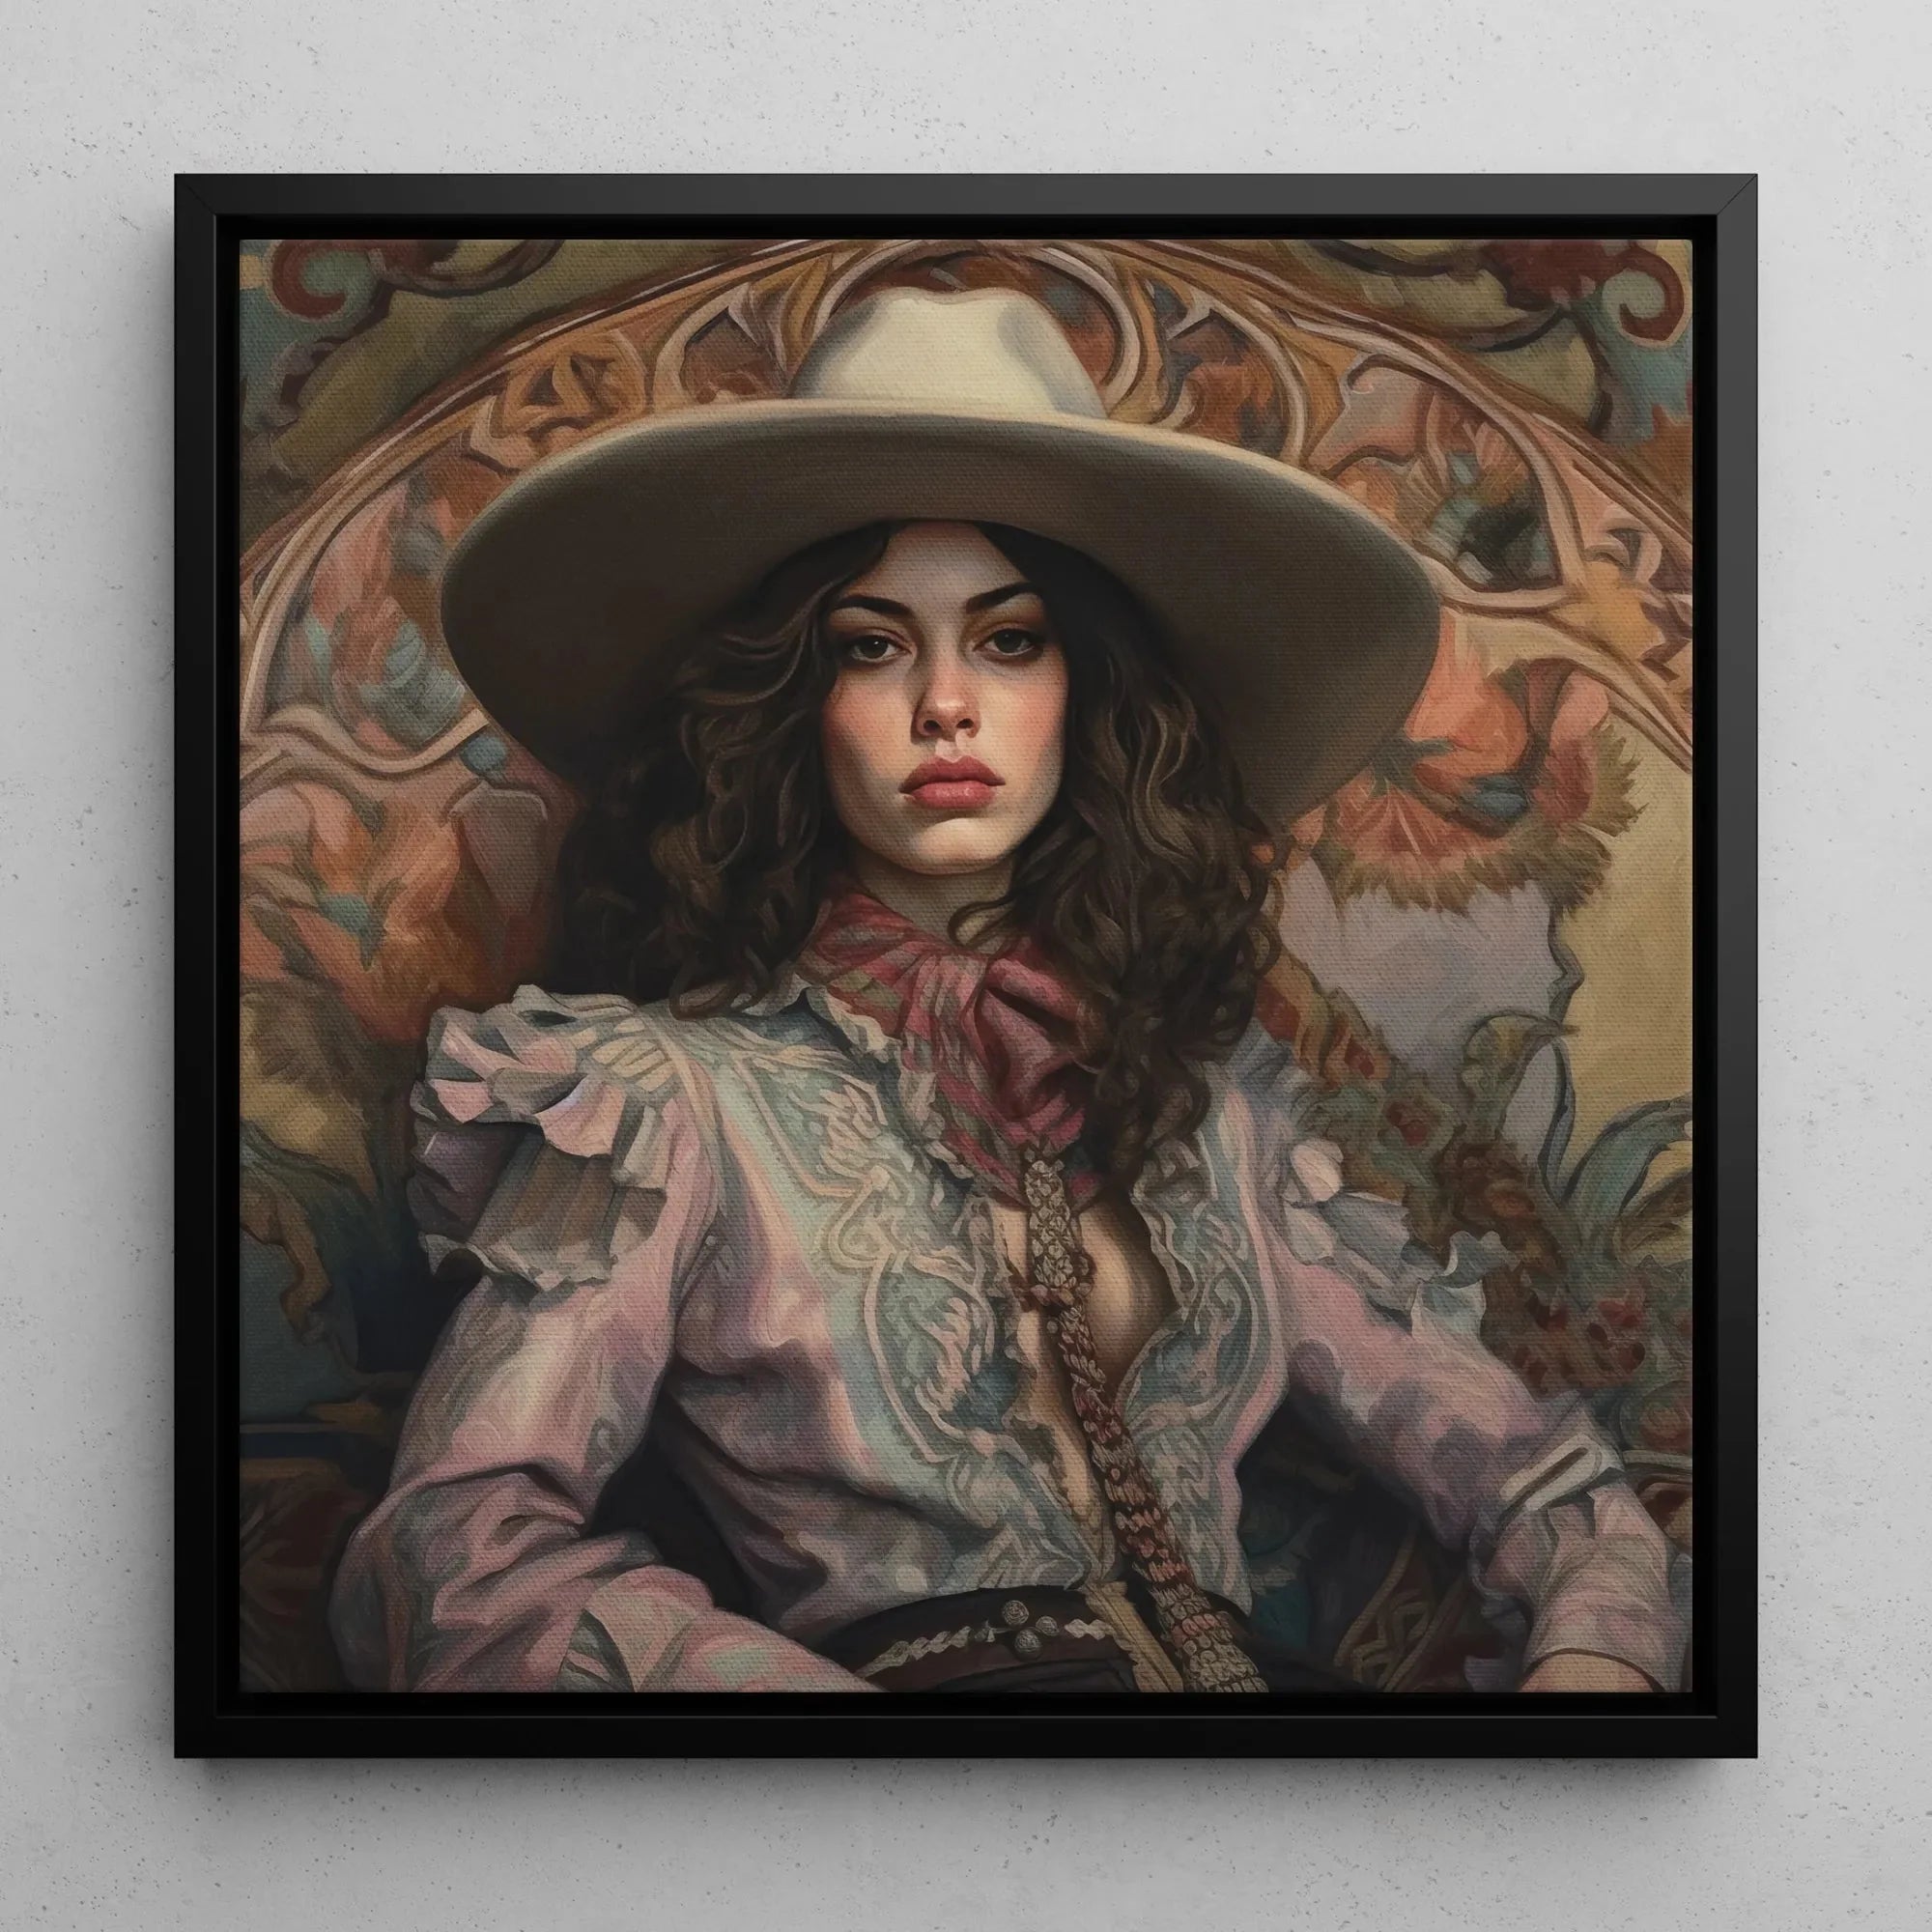 Alex - Lesbian Cowgirl Framed Canvas - Wlw Sapphic Queerart - Posters Prints & Visual Artwork - Aesthetic Art